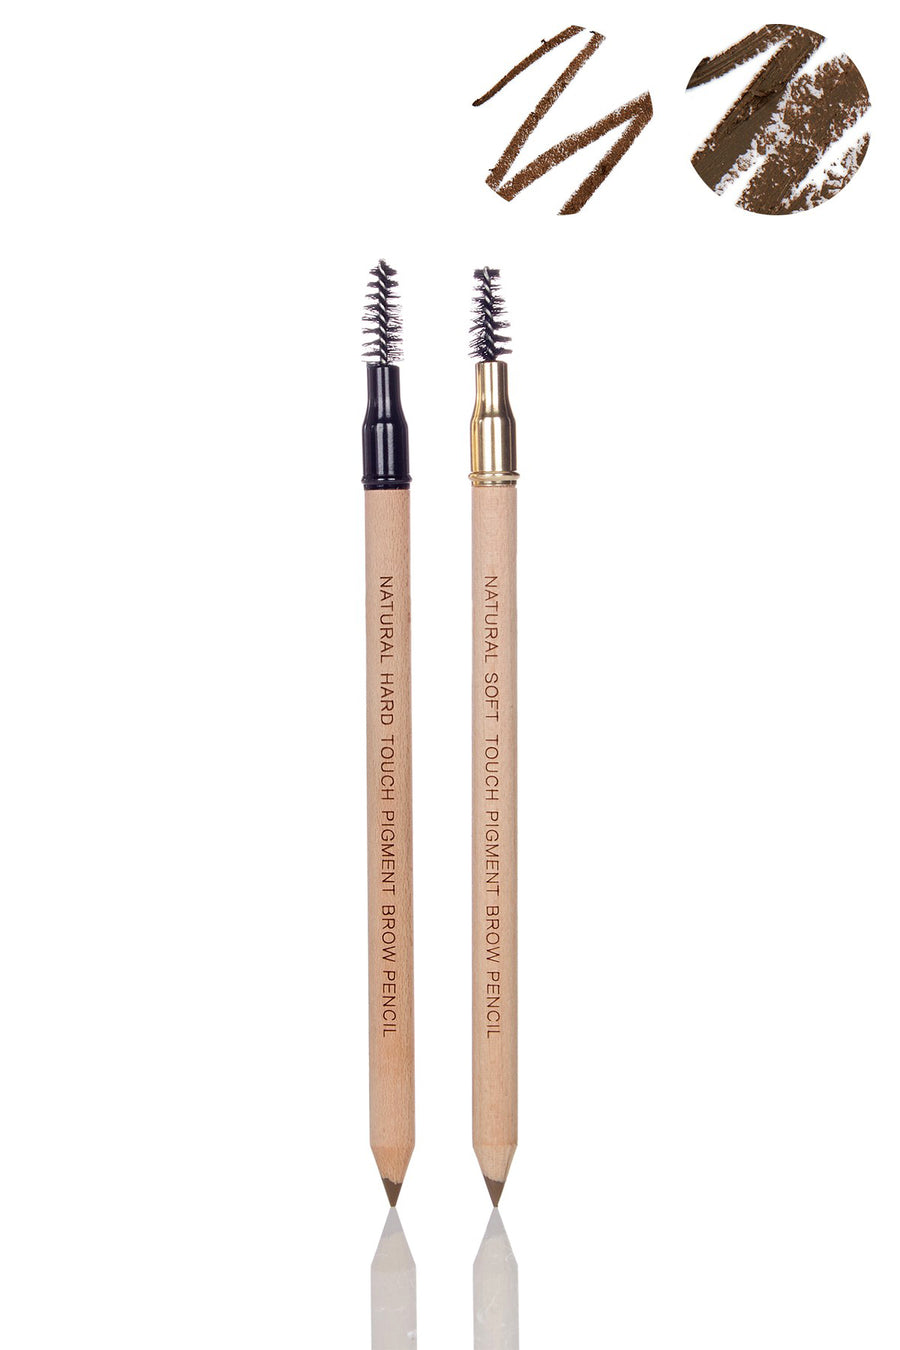 Universal Brow Definer Set of Soft Touch & Hard Touch Universal Formula Professional Eyebrow Pencil - Blend Mineral Cosmetics